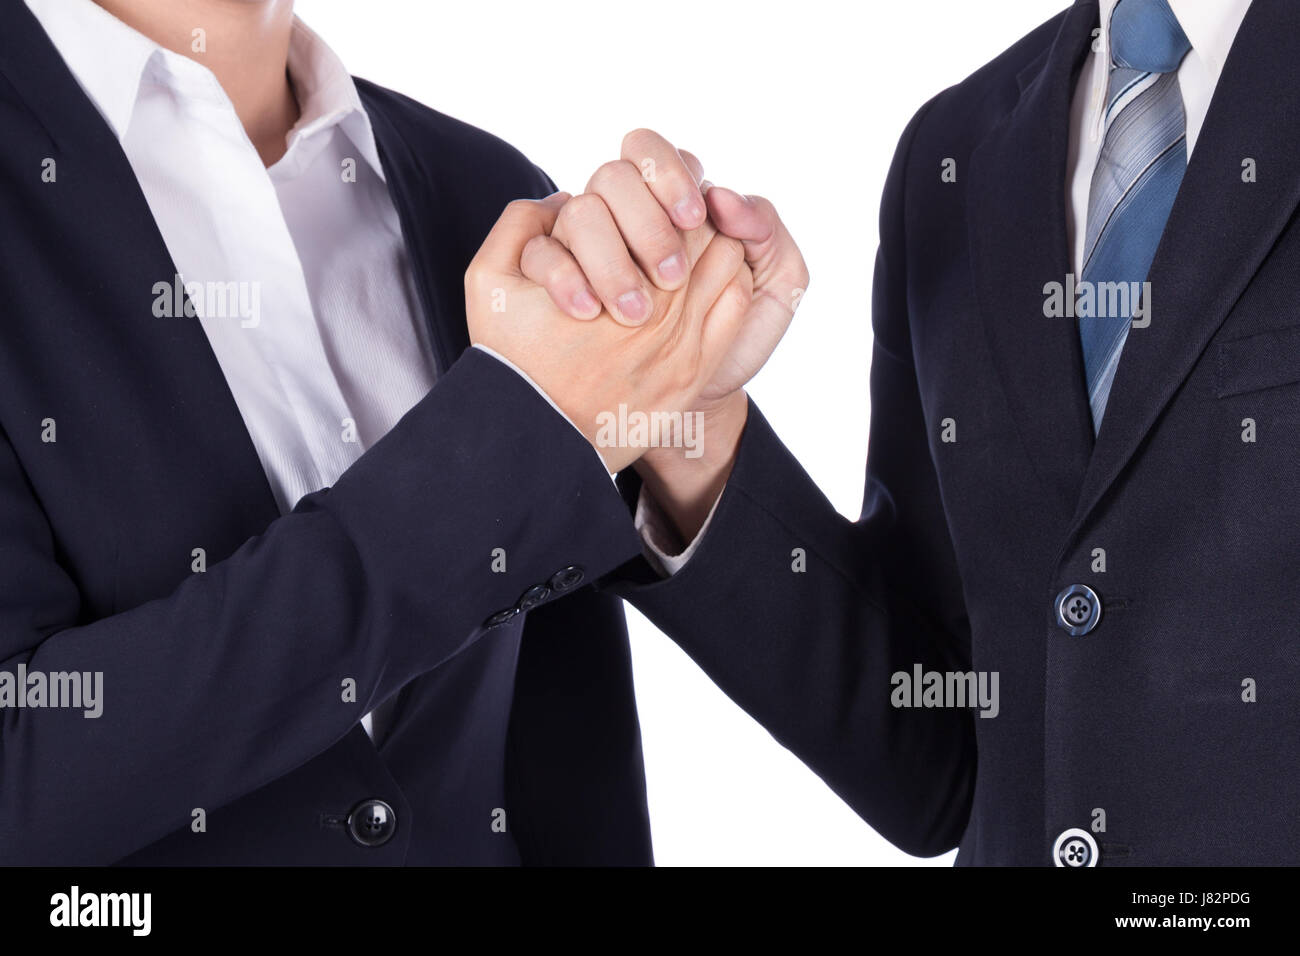 Arm wrestling between businessman and businesswoman isolated on white background Stock Photo